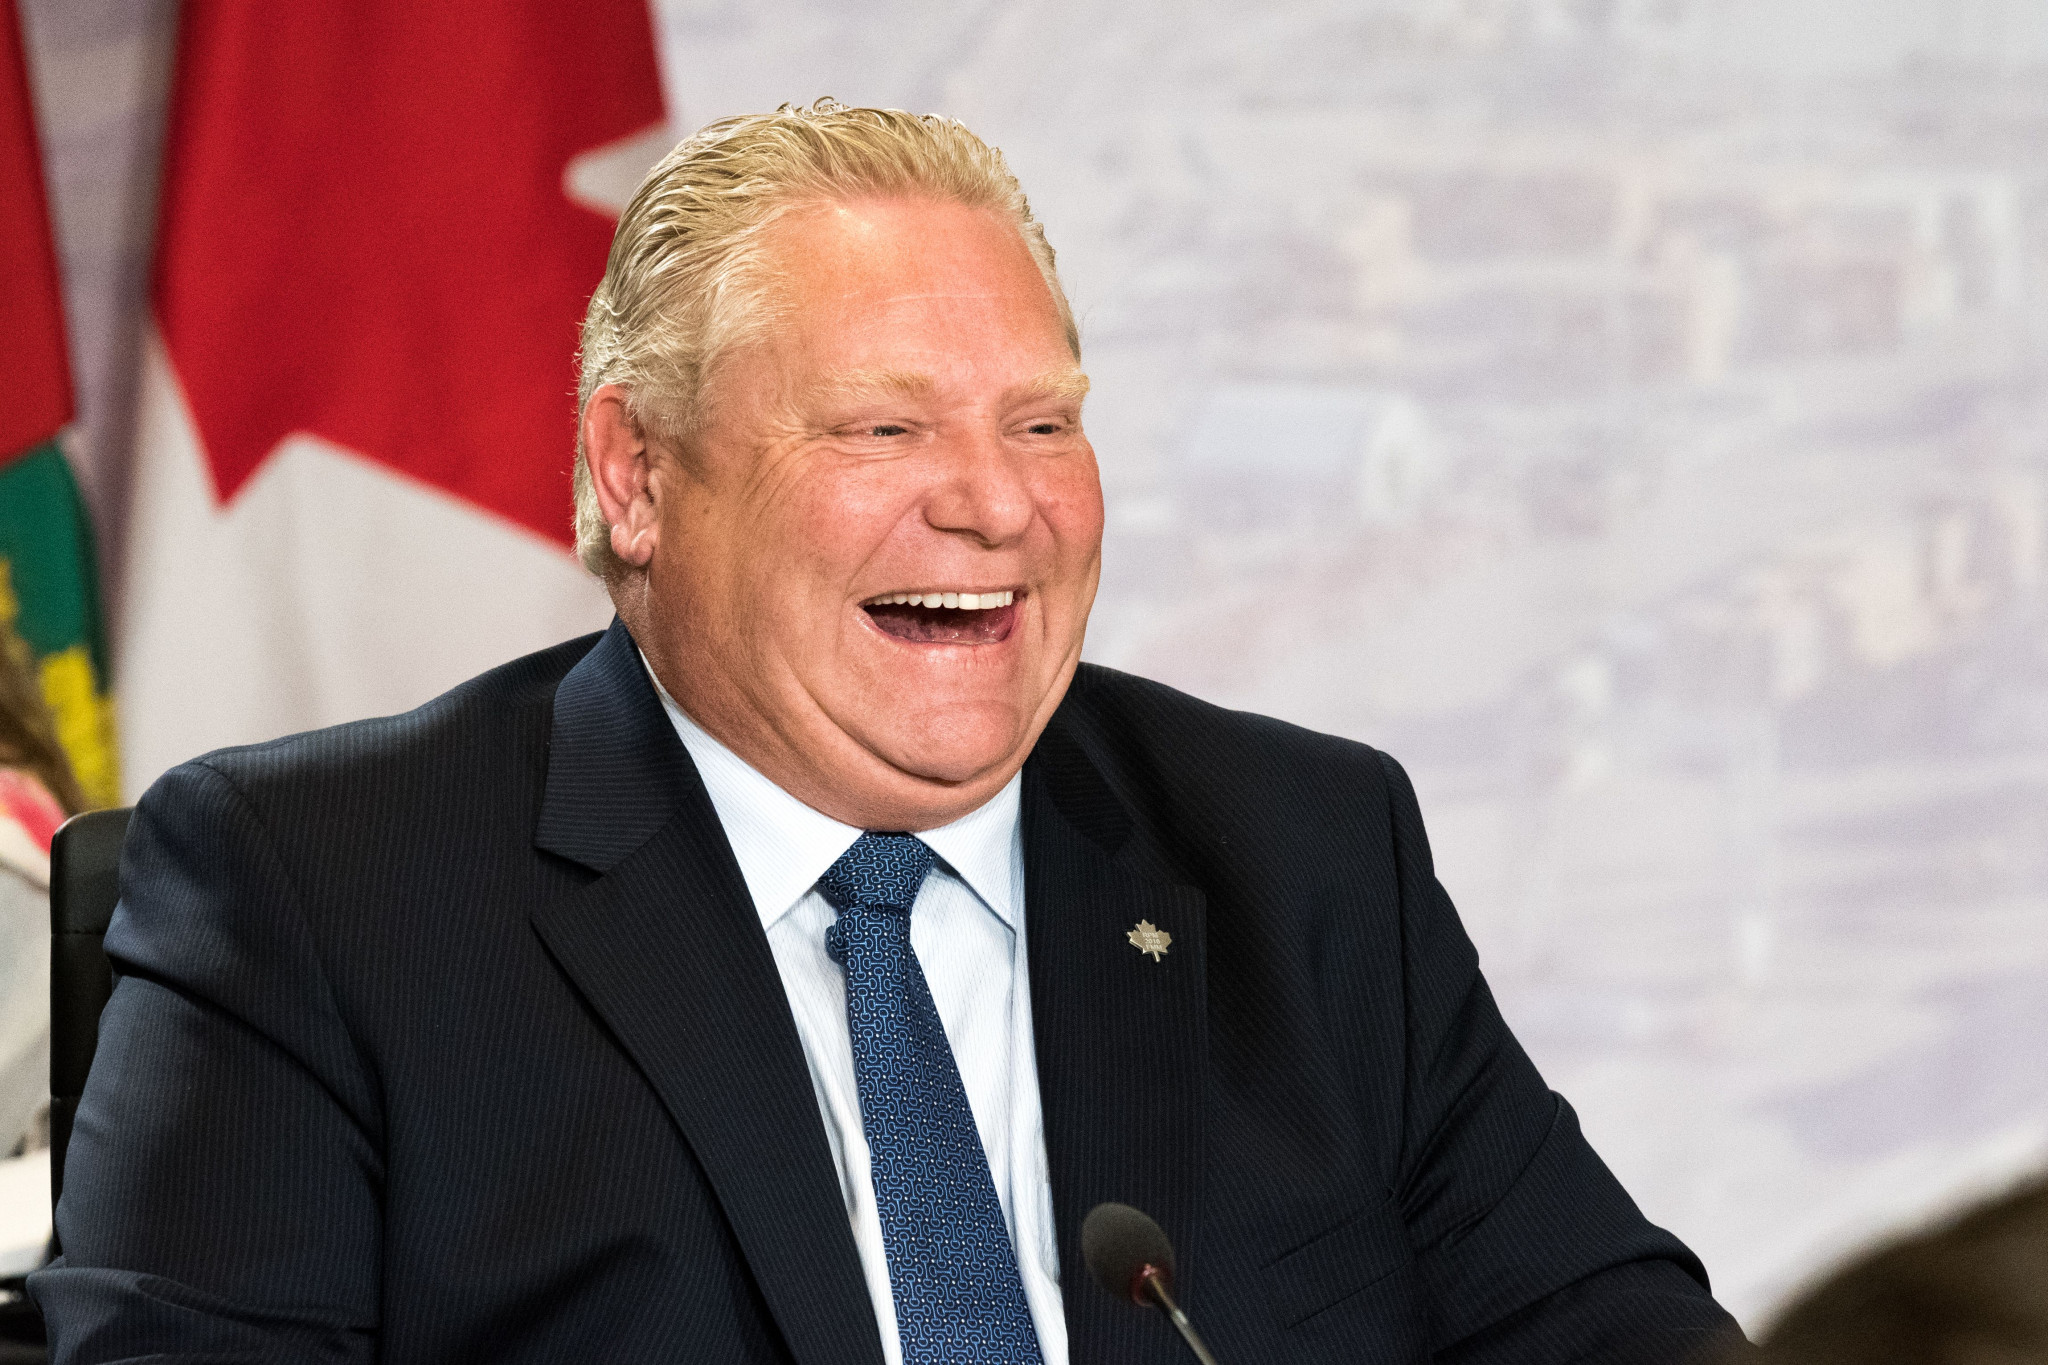 Ontario Premier Doug Ford has encouraged the Bid Committee to explore hosting the Commonwealth Games later than 2026 ©Getty Images